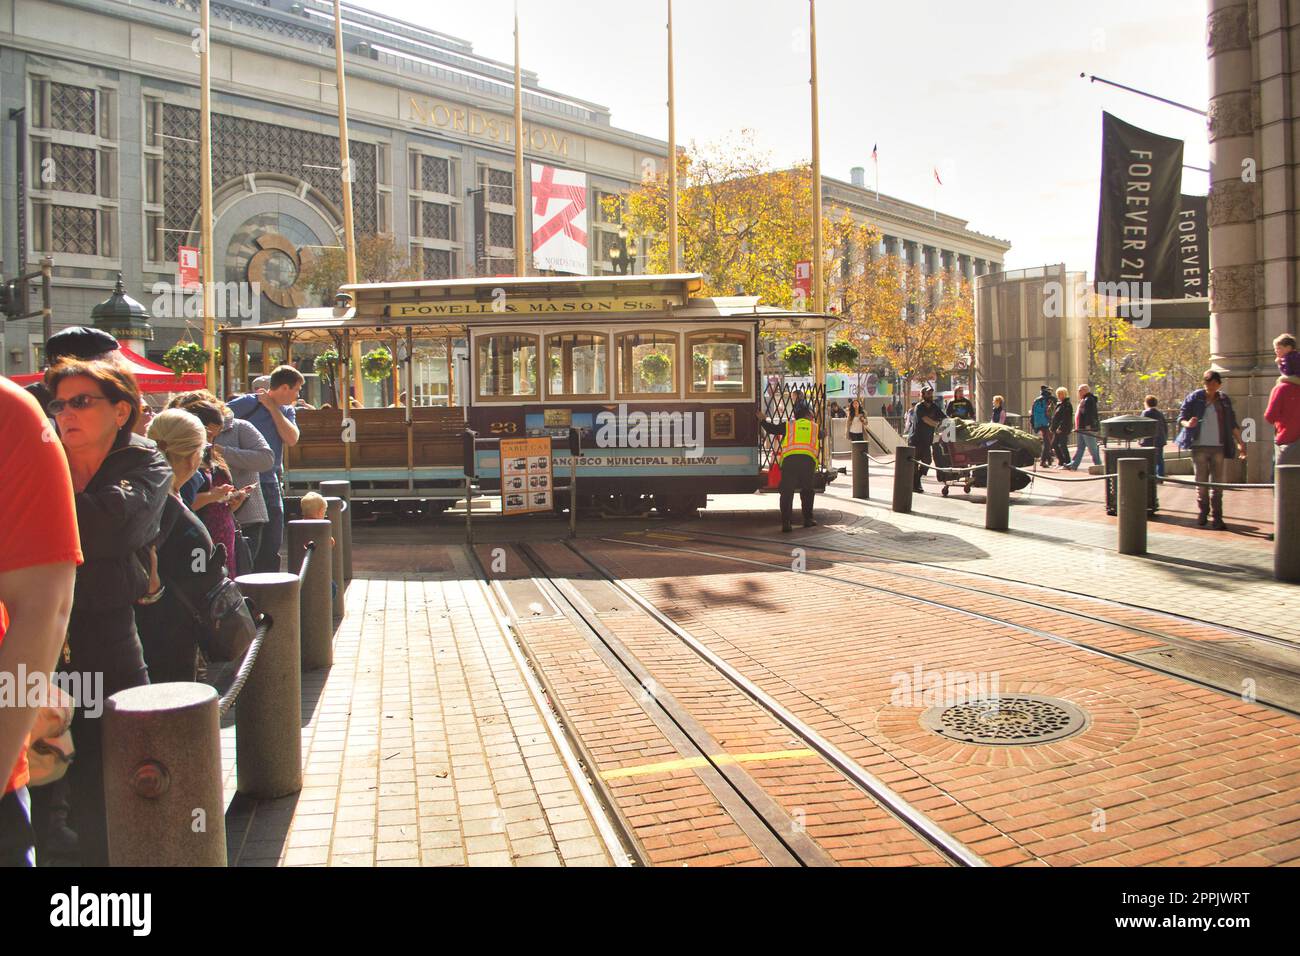 Street view on historical cable car tracks in San Francisco, California, United States Stock Photo